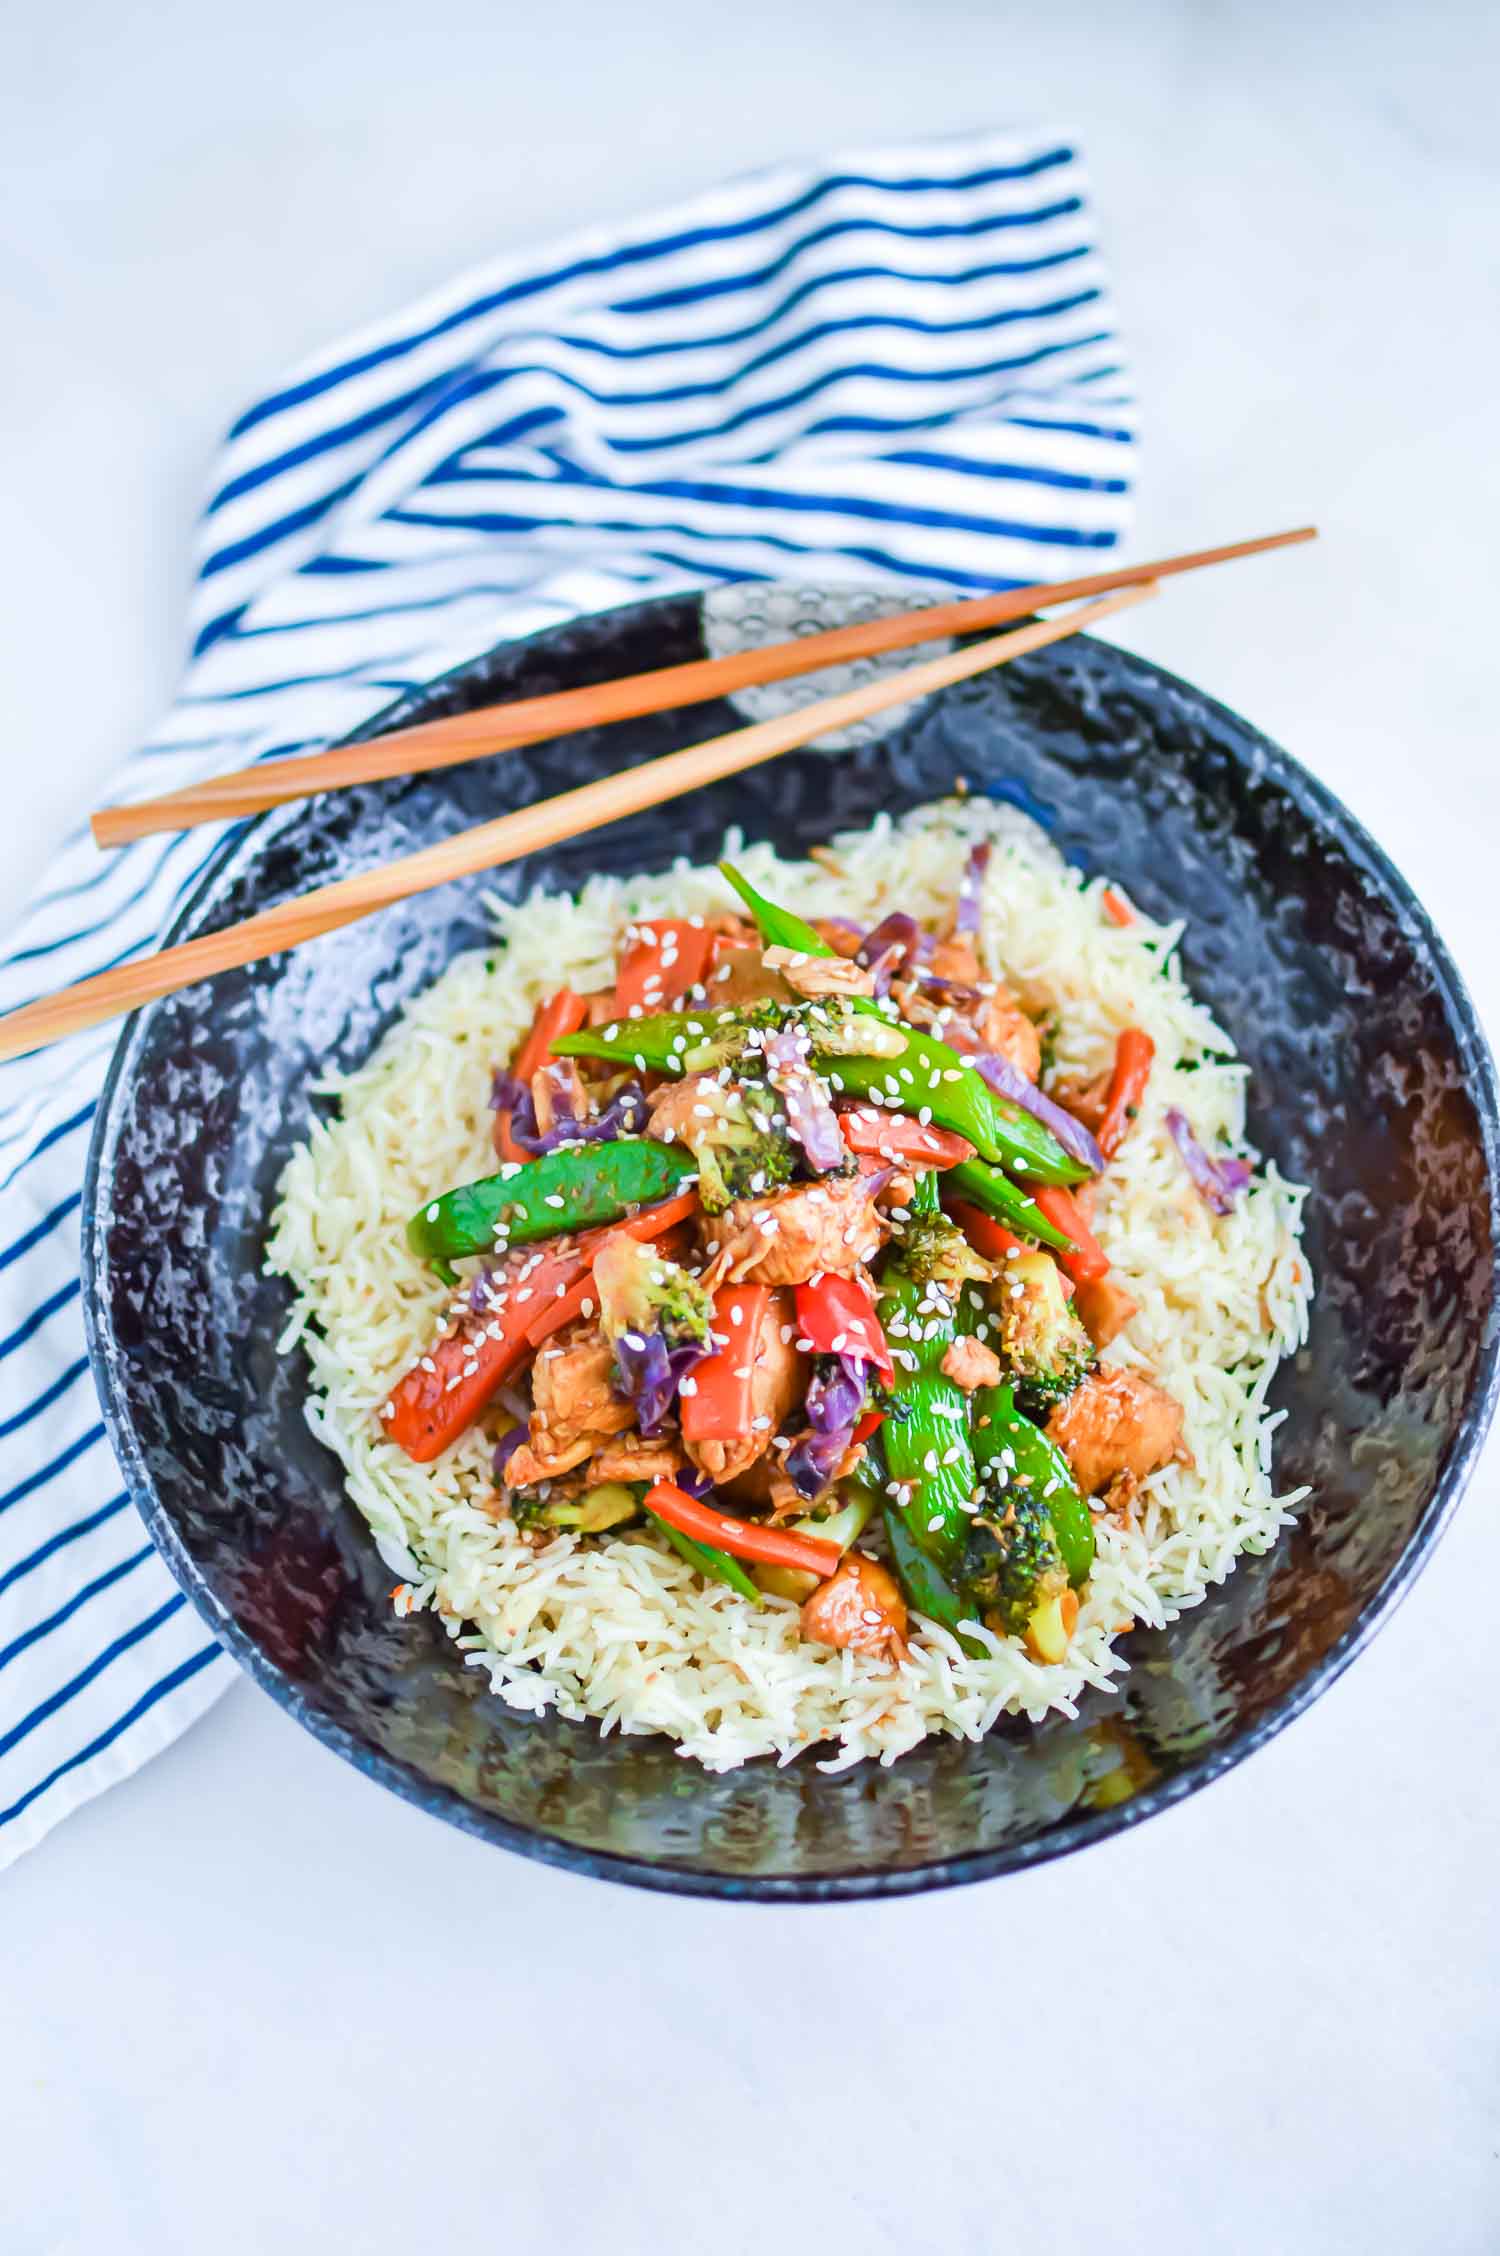 Chicken Stir-fry with vegetables over rice in a bowl with chopsticks  and blue and white striped napkin